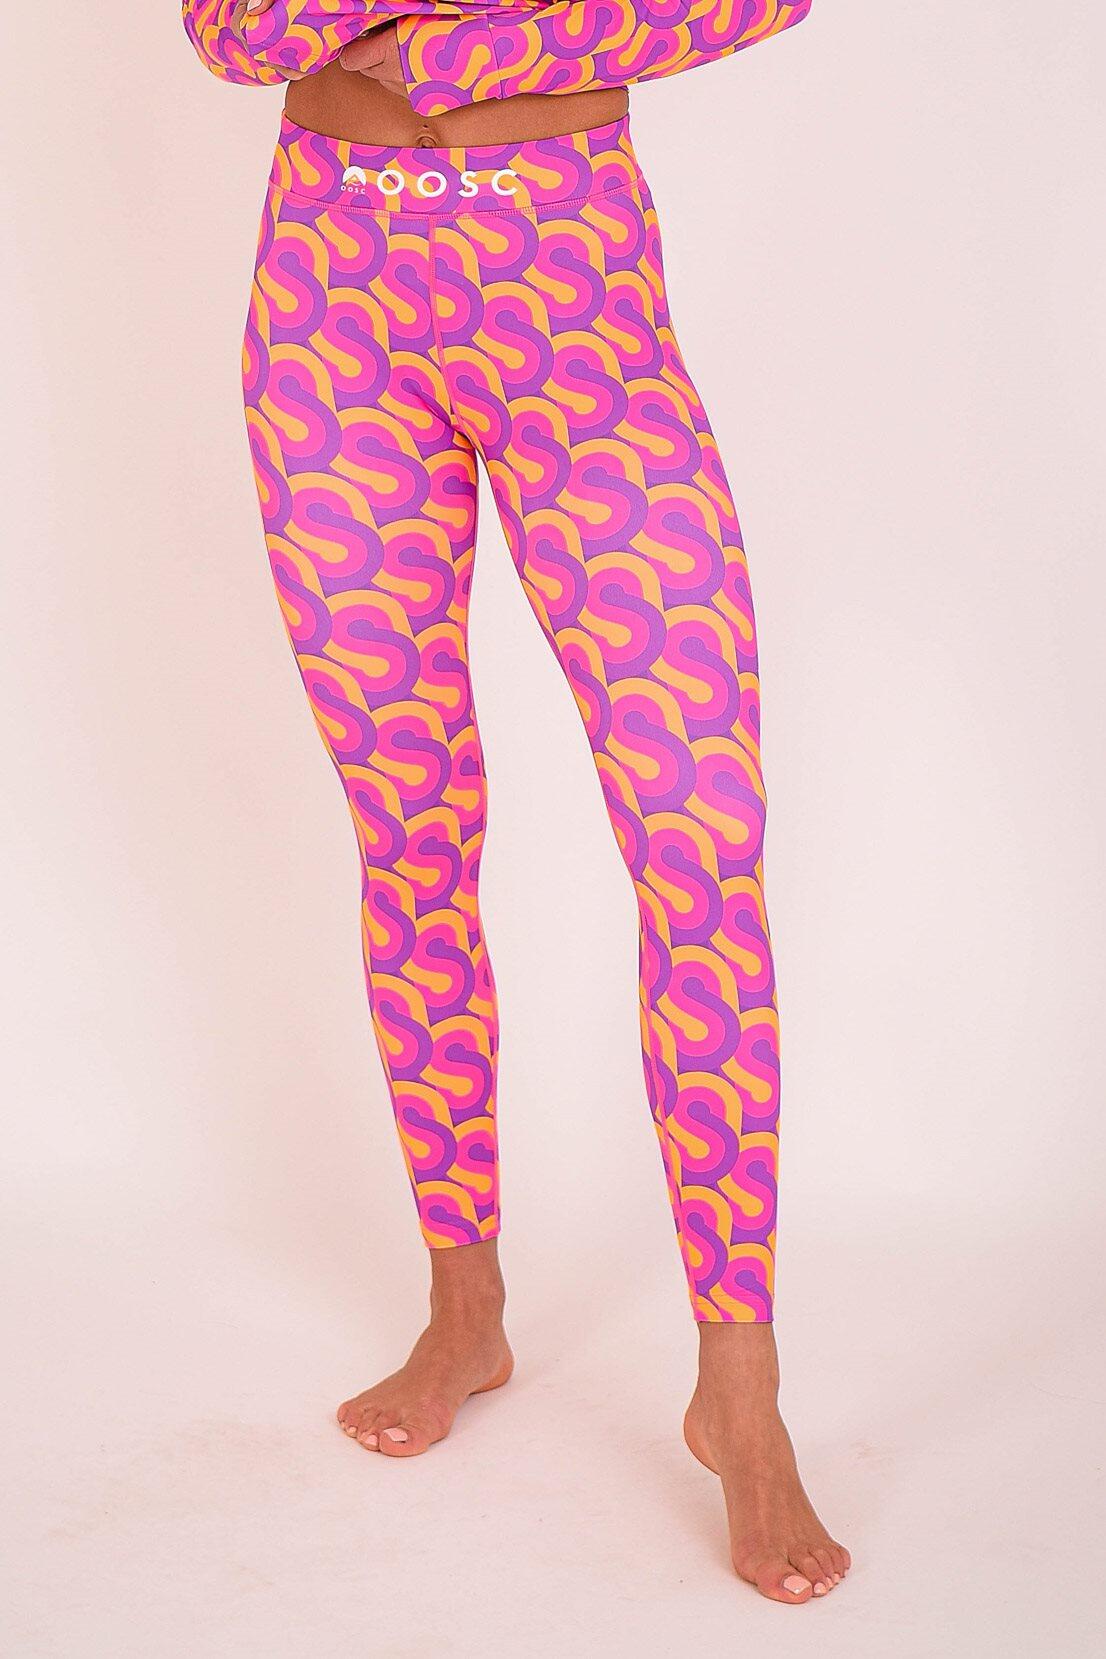 OOSC That 70's Show Womens Baselayer Legging